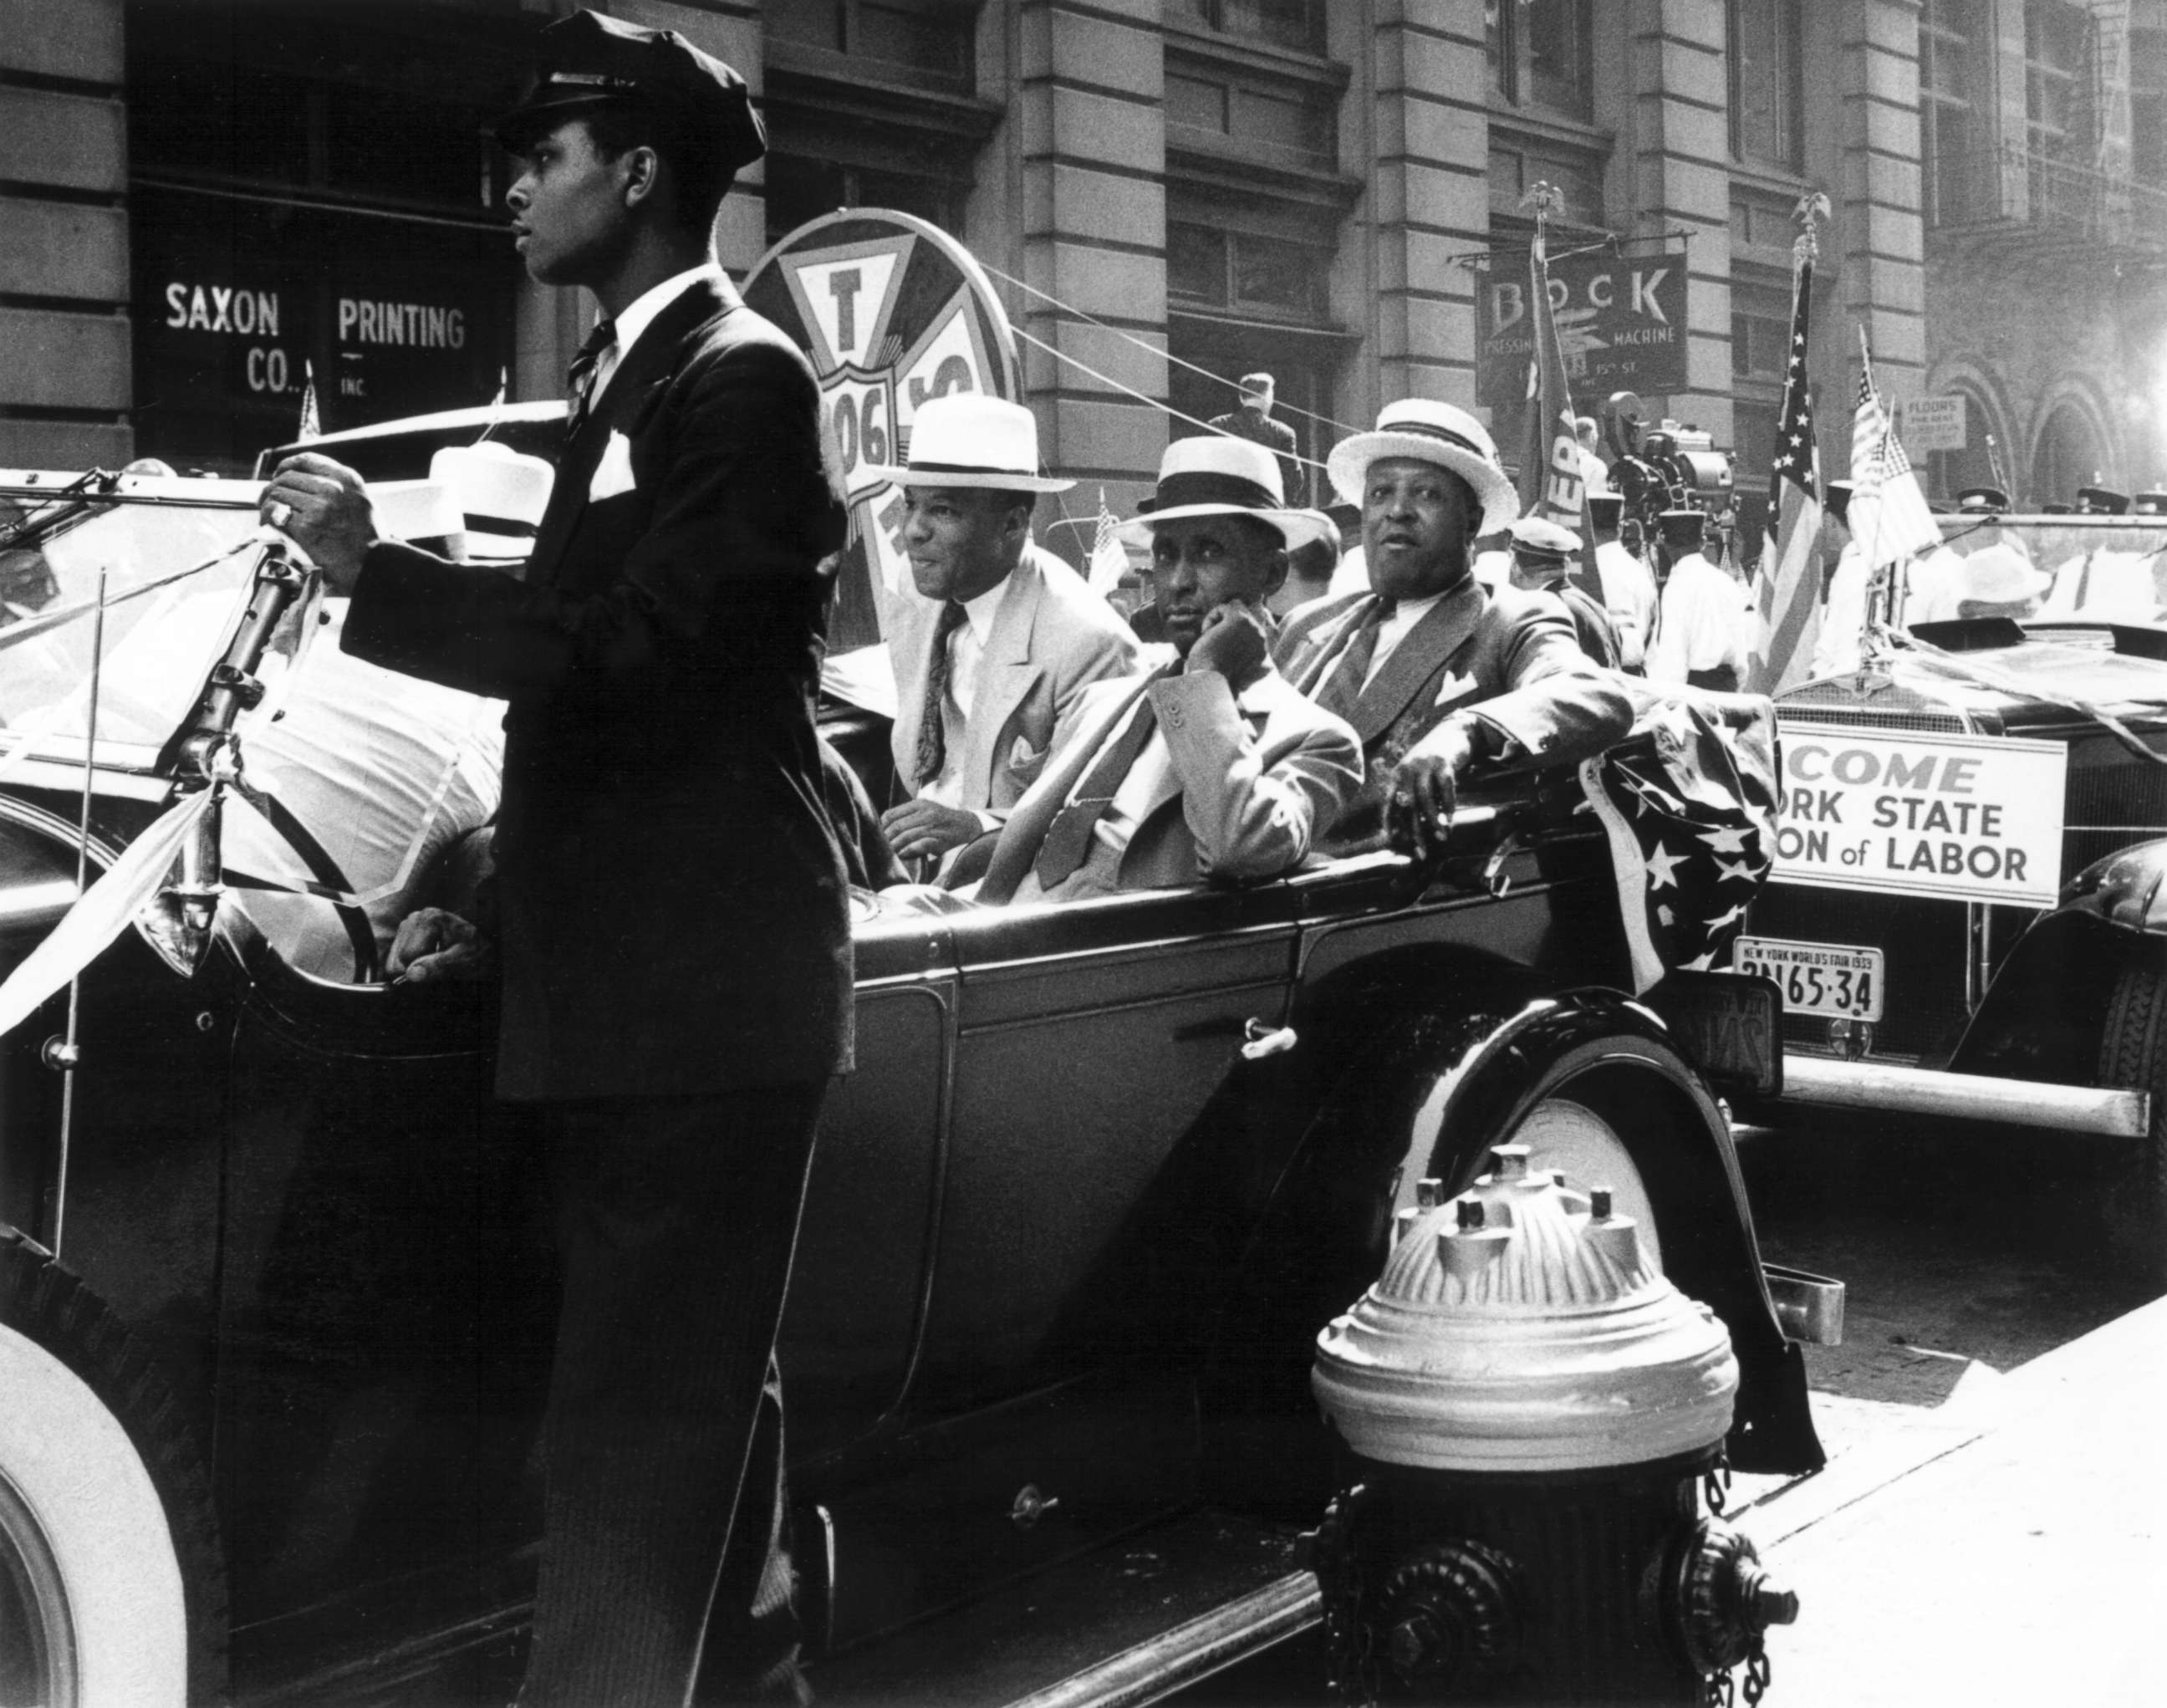 PHOTO: In this file photo Phillip Randolph and other officials of the Pullman Porter's and Conductor's Union in the 1939 Labor Day Parade in New York City.